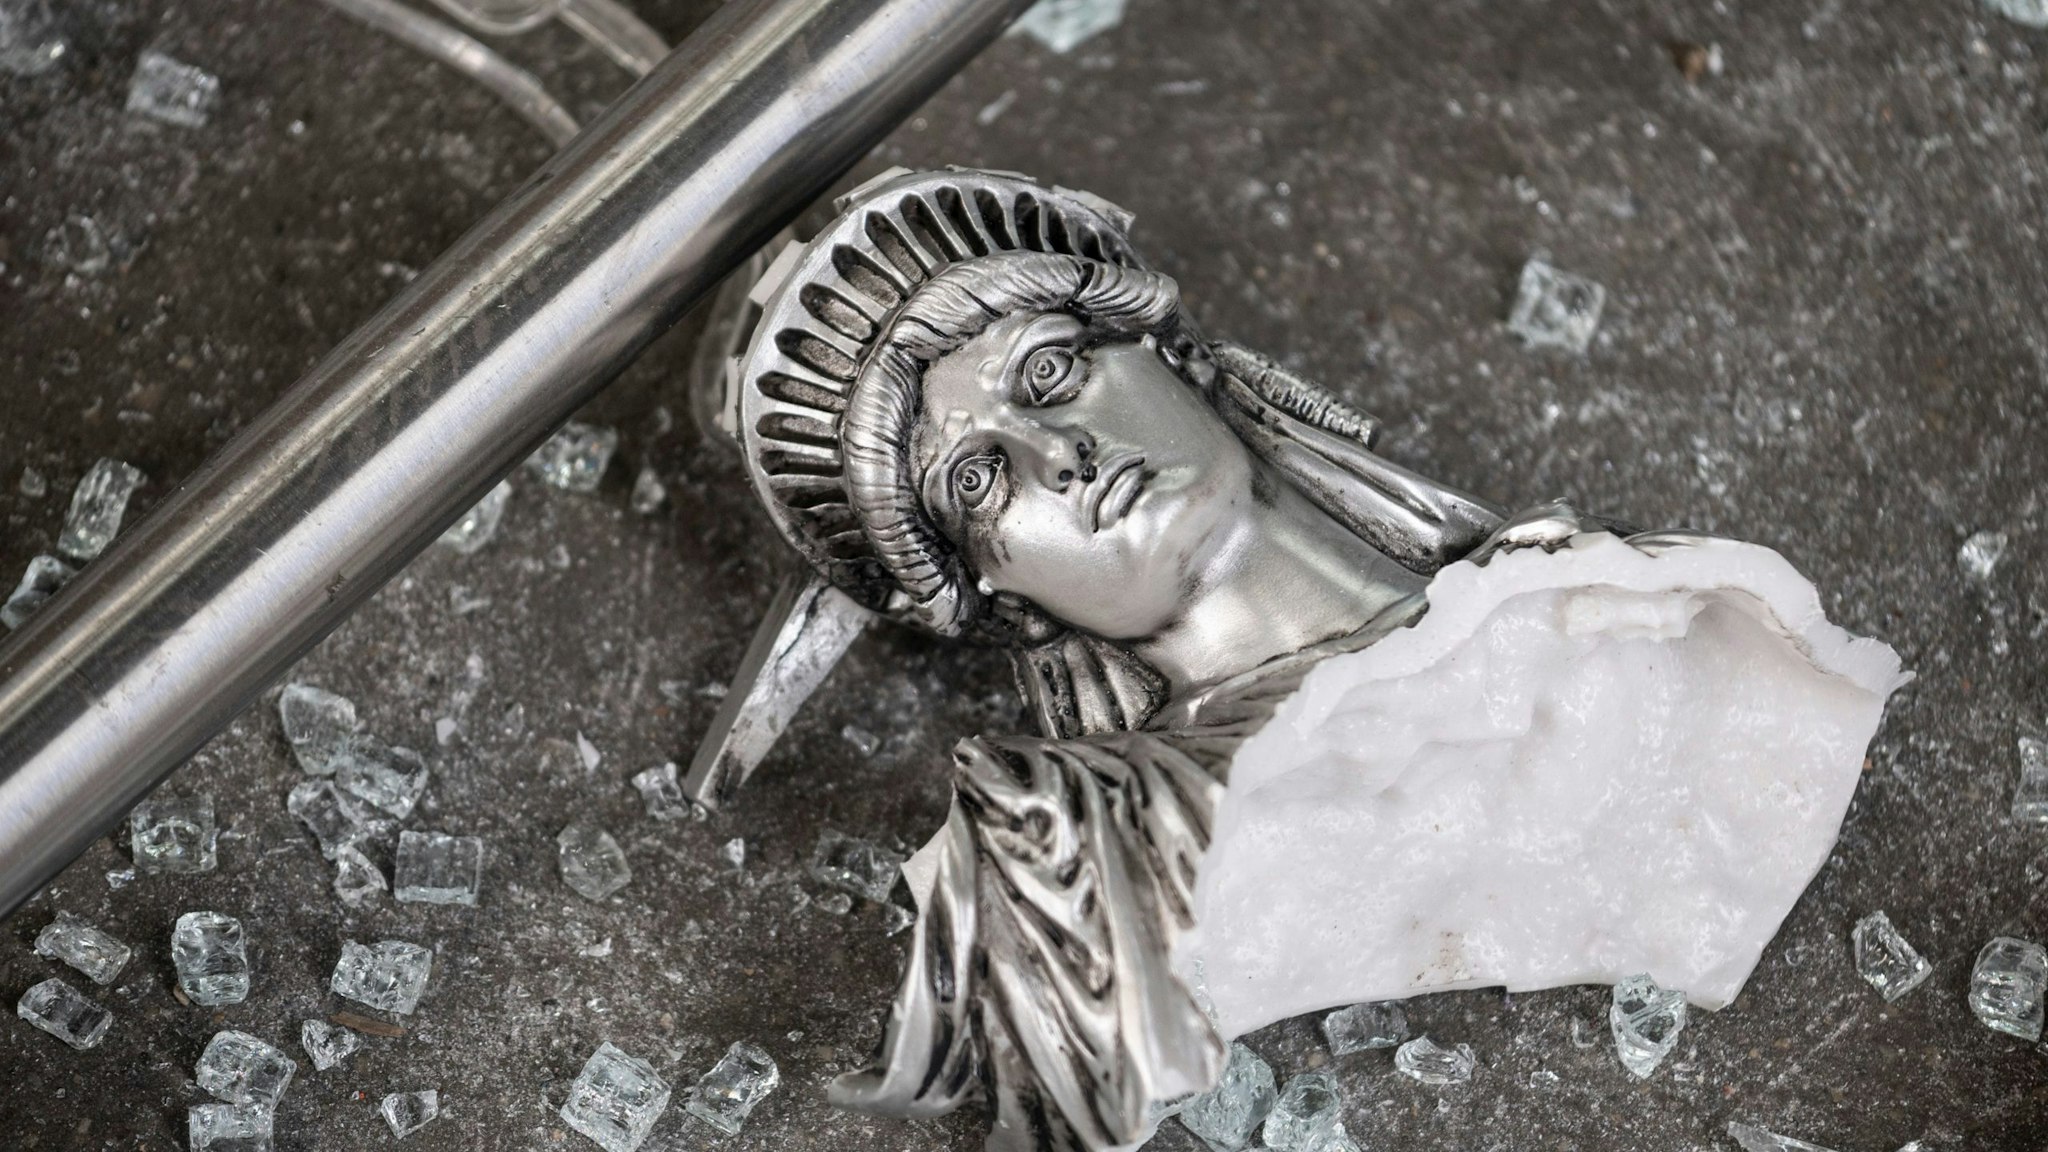 TOPSHOT - A broken Statue of Liberty figure is seen between glass shatters outside a looted souvenir shop after a night of protest over the death of an African-American man George Floyd in Minneapolis on June 2, 2020 in Manhattan in New York City. - New York's mayor Bill de Blasio yesterday declared a city curfew from 11:00 pm to 5:00 am, as sometimes violent anti-racism protests roil communities nationwide. Saying that "we support peaceful protest," De Blasio tweeted he had made the decision in consultation with the state's governor Andrew Cuomo, following the lead of many large US cities that instituted curfews in a bid to clamp down on violence and looting. (Photo by Johannes EISELE / AFP) (Photo by JOHANNES EISELE/AFP via